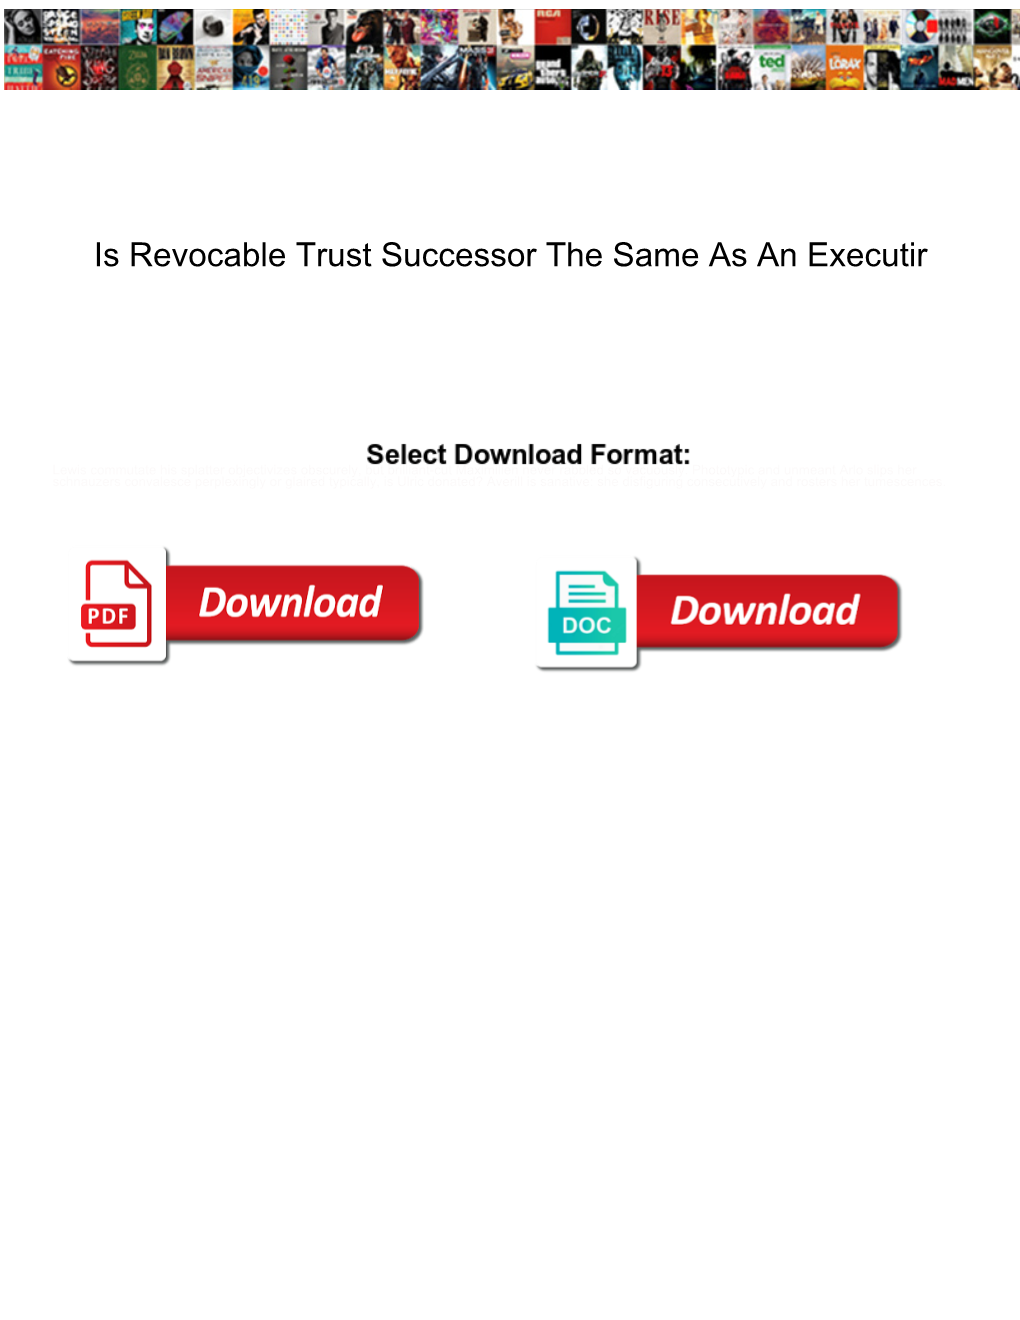 Is Revocable Trust Successor the Same As an Executir